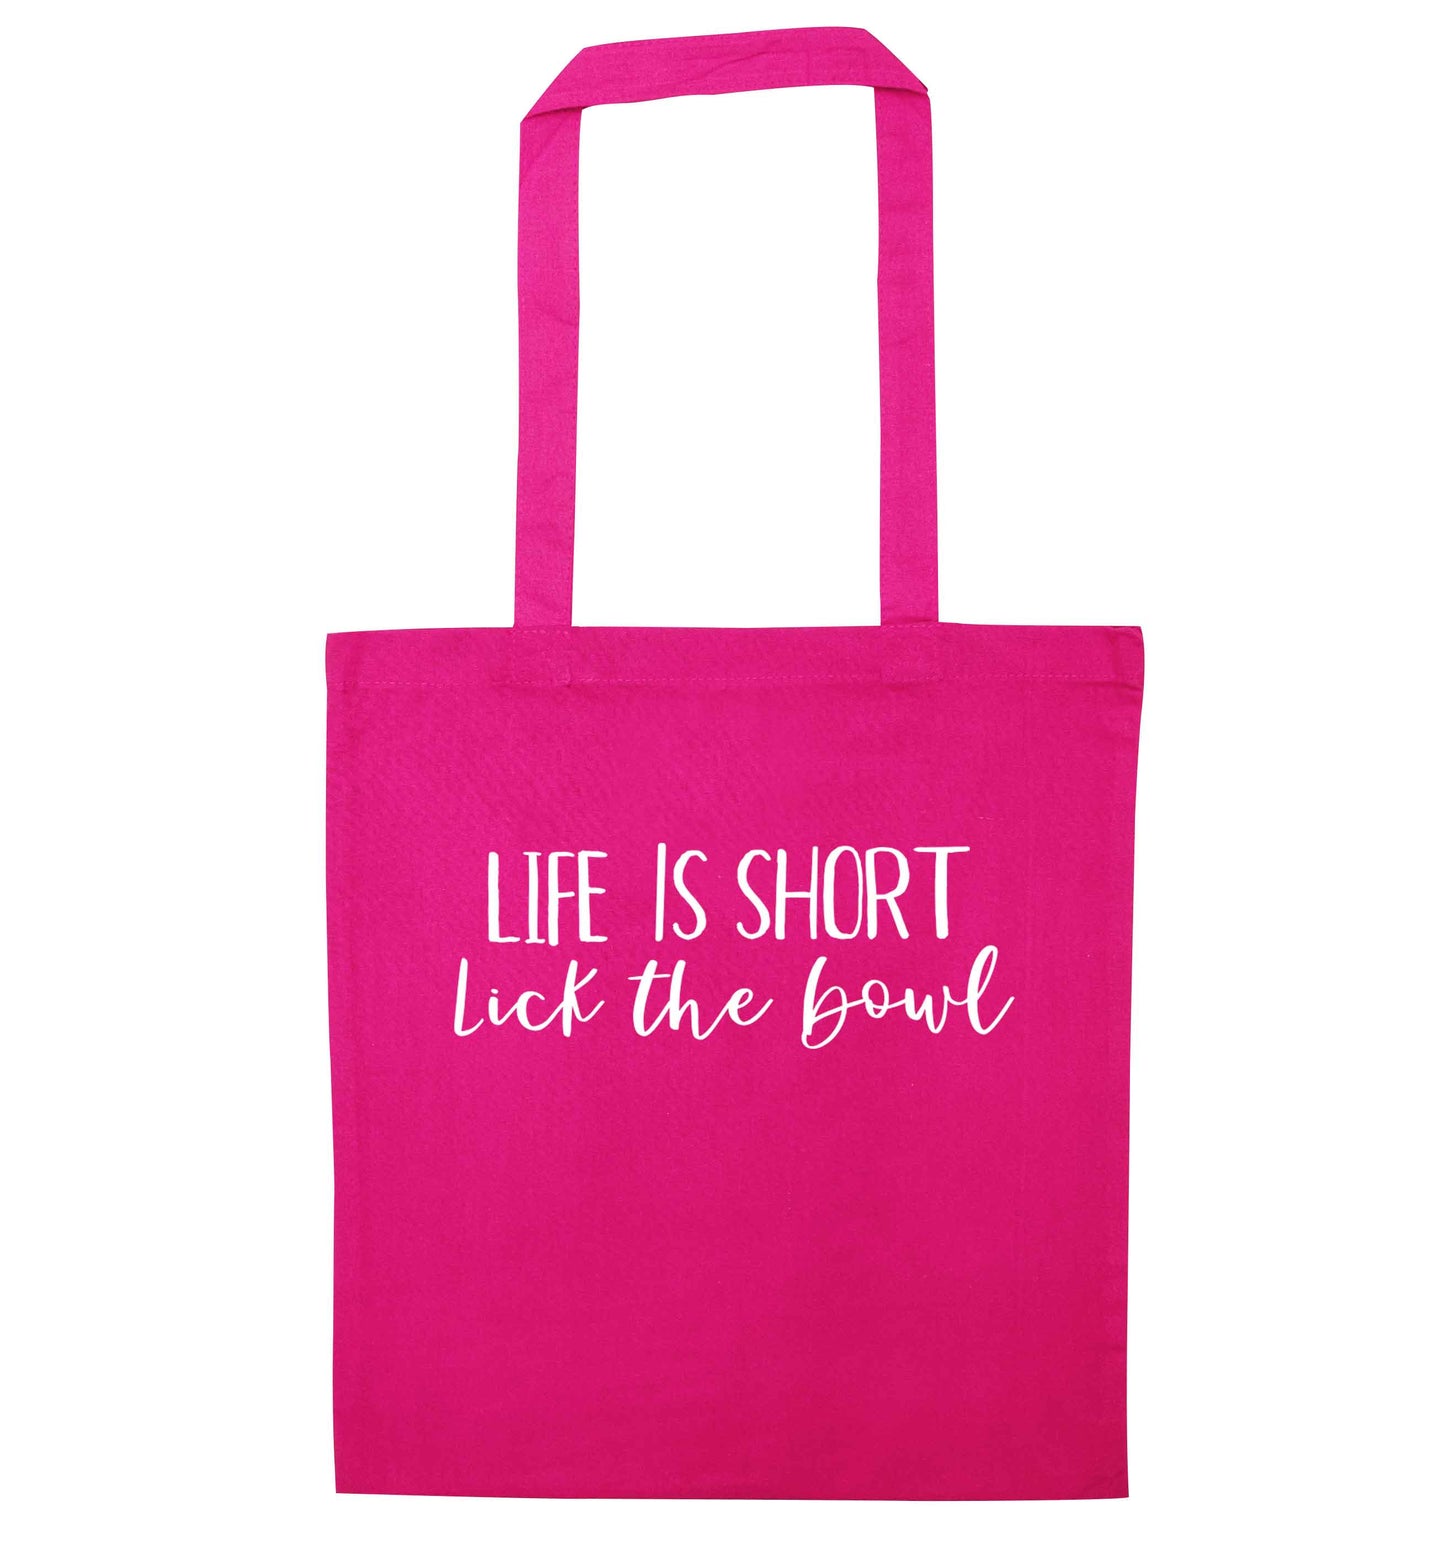 Life is short lick the bowl pink tote bag